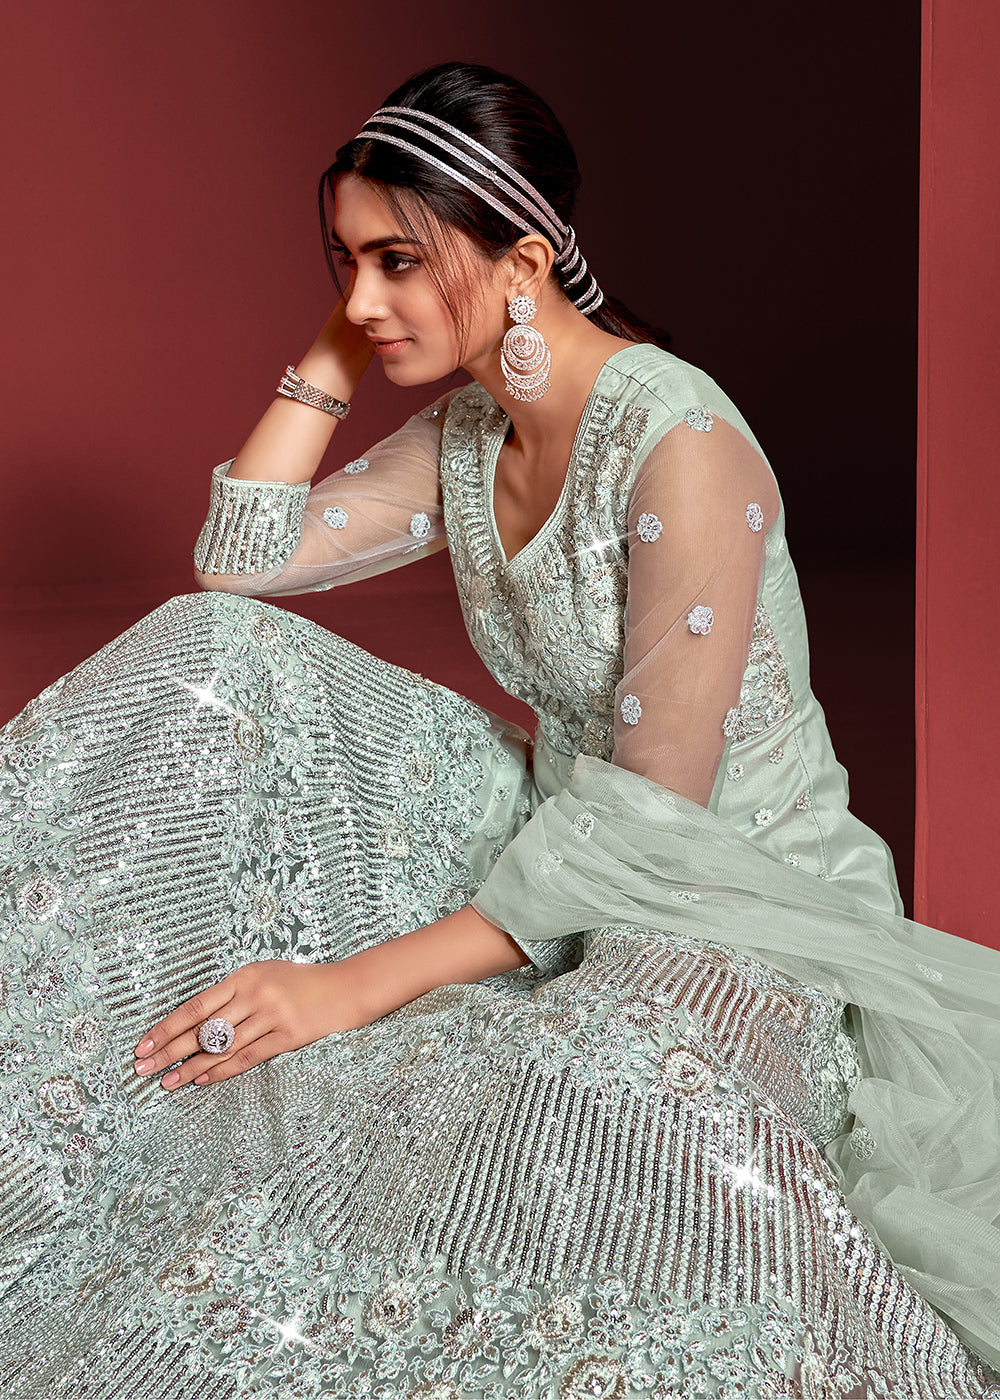 Buy Now Festive Party Style Light Blue Embroidered Net Anarkali Gown Online in USA, UK, Australia, New Zealand, Canada, Italy & Worldwide at Empress Clothing.